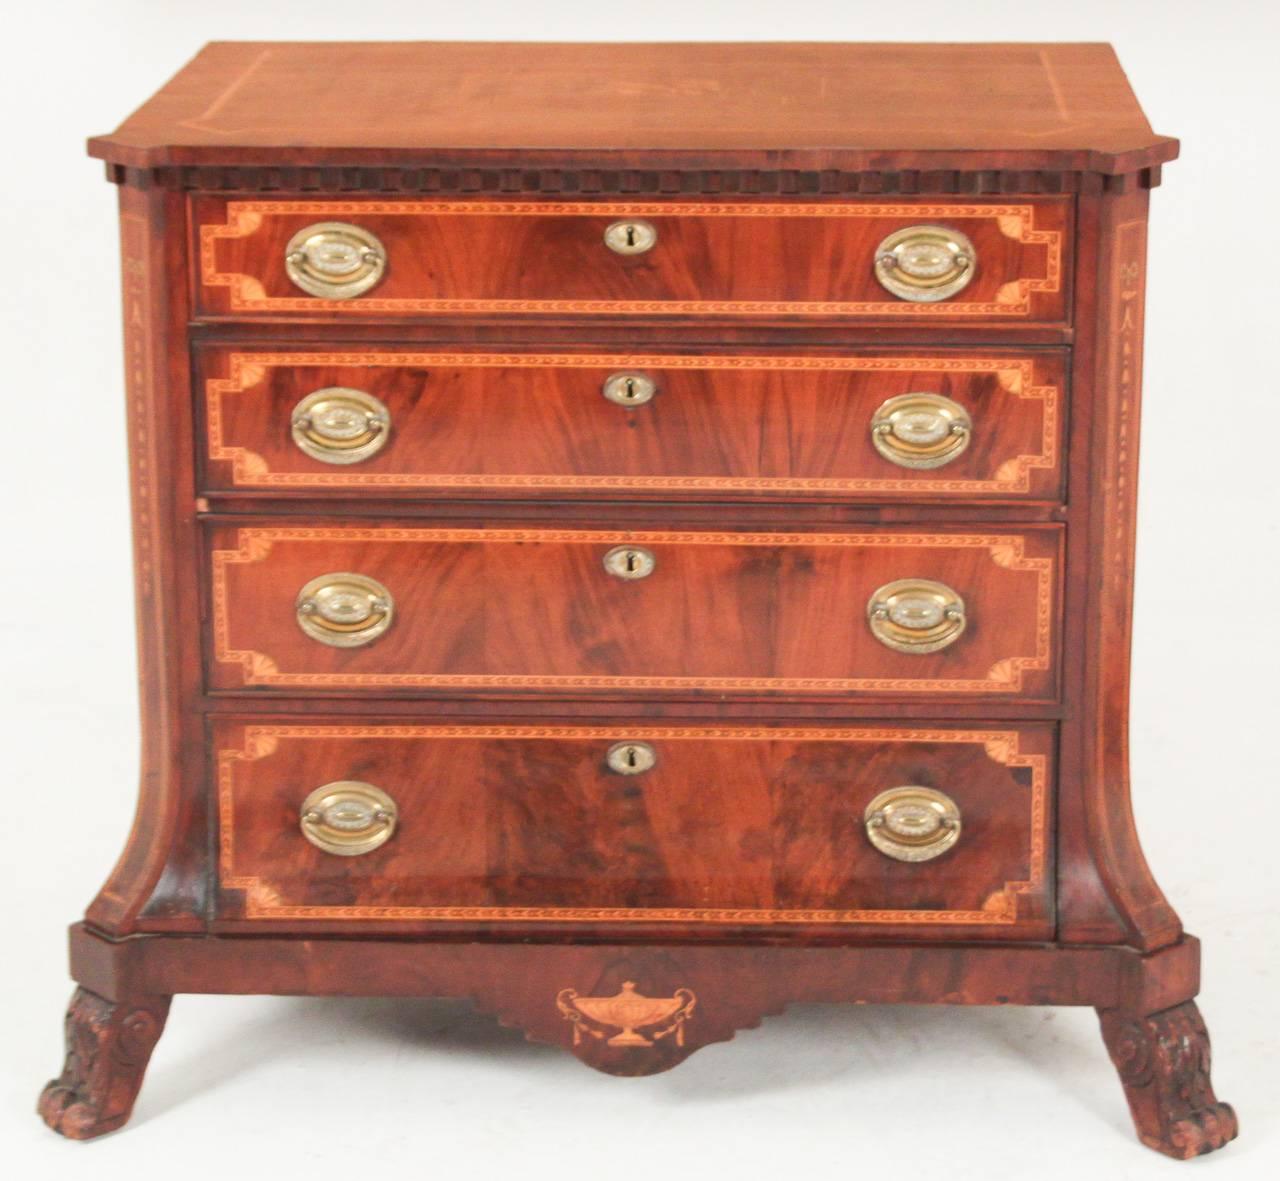 Wonderful early 19th century Dutch neoclassical inlaid four-drawer commode. Having intricately detailed inlays on all sides with musical motif inlay on top, brass hardware, and resting on scrolled claw feet. 